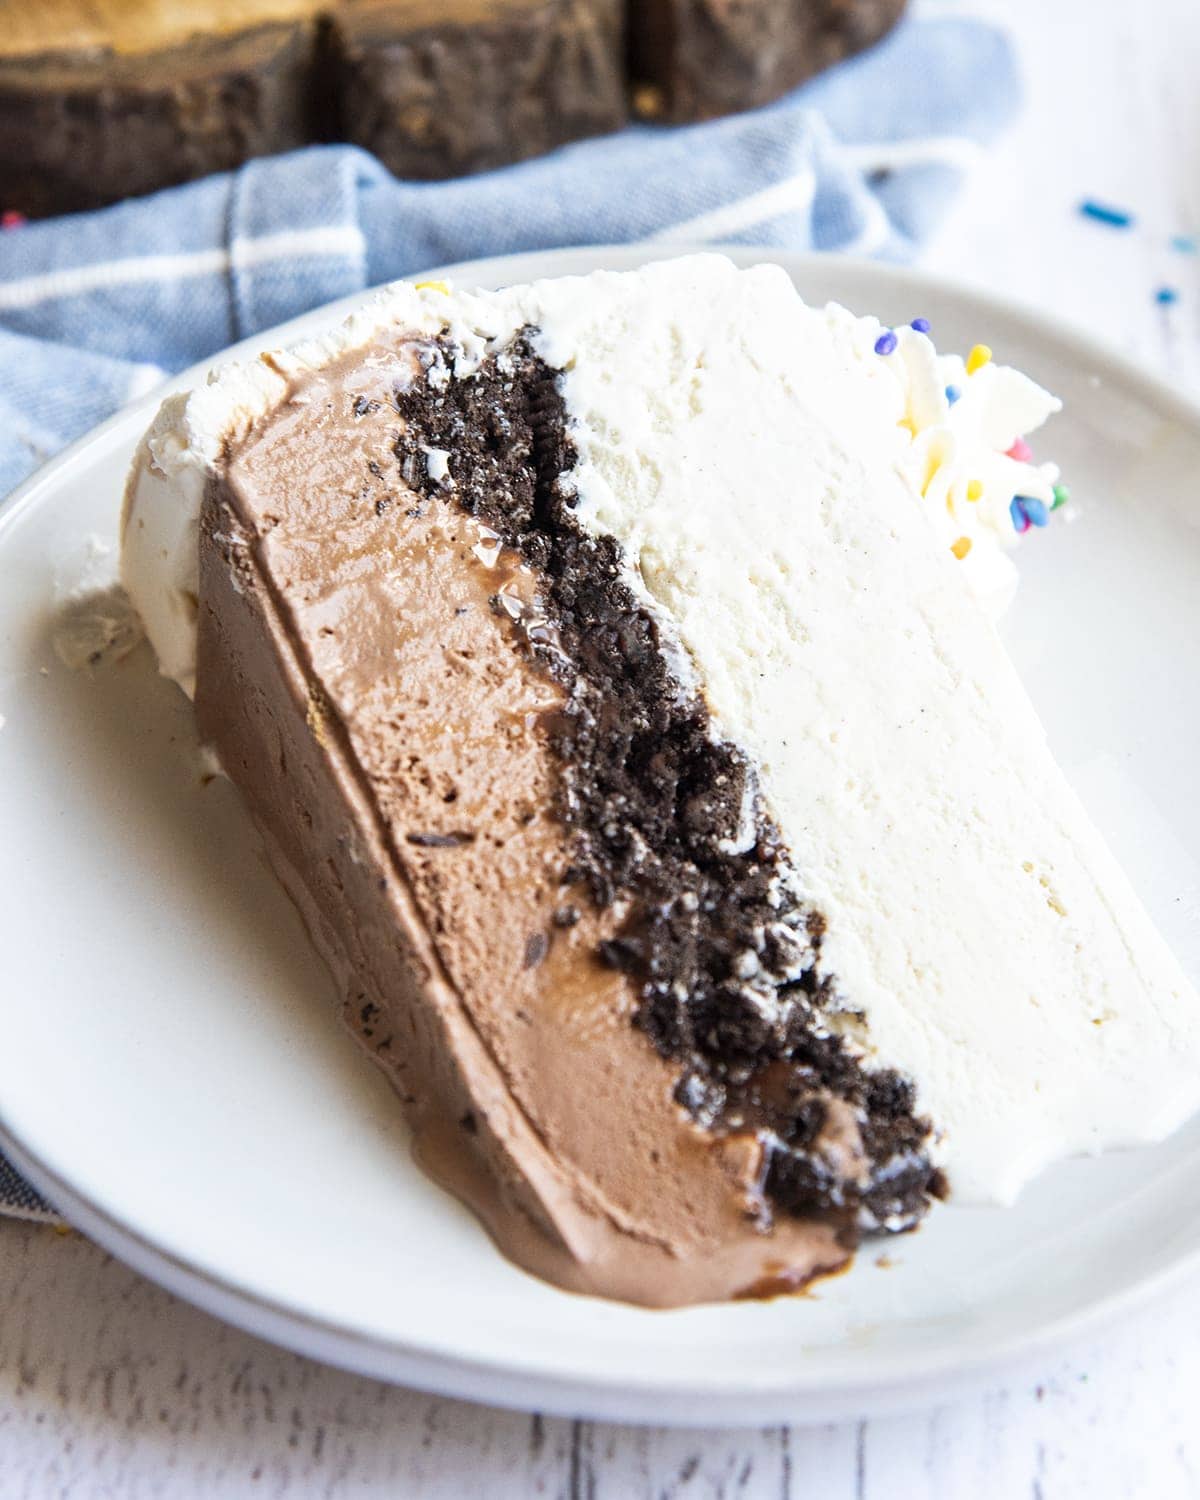 A slice of ice cream cake on a plate.